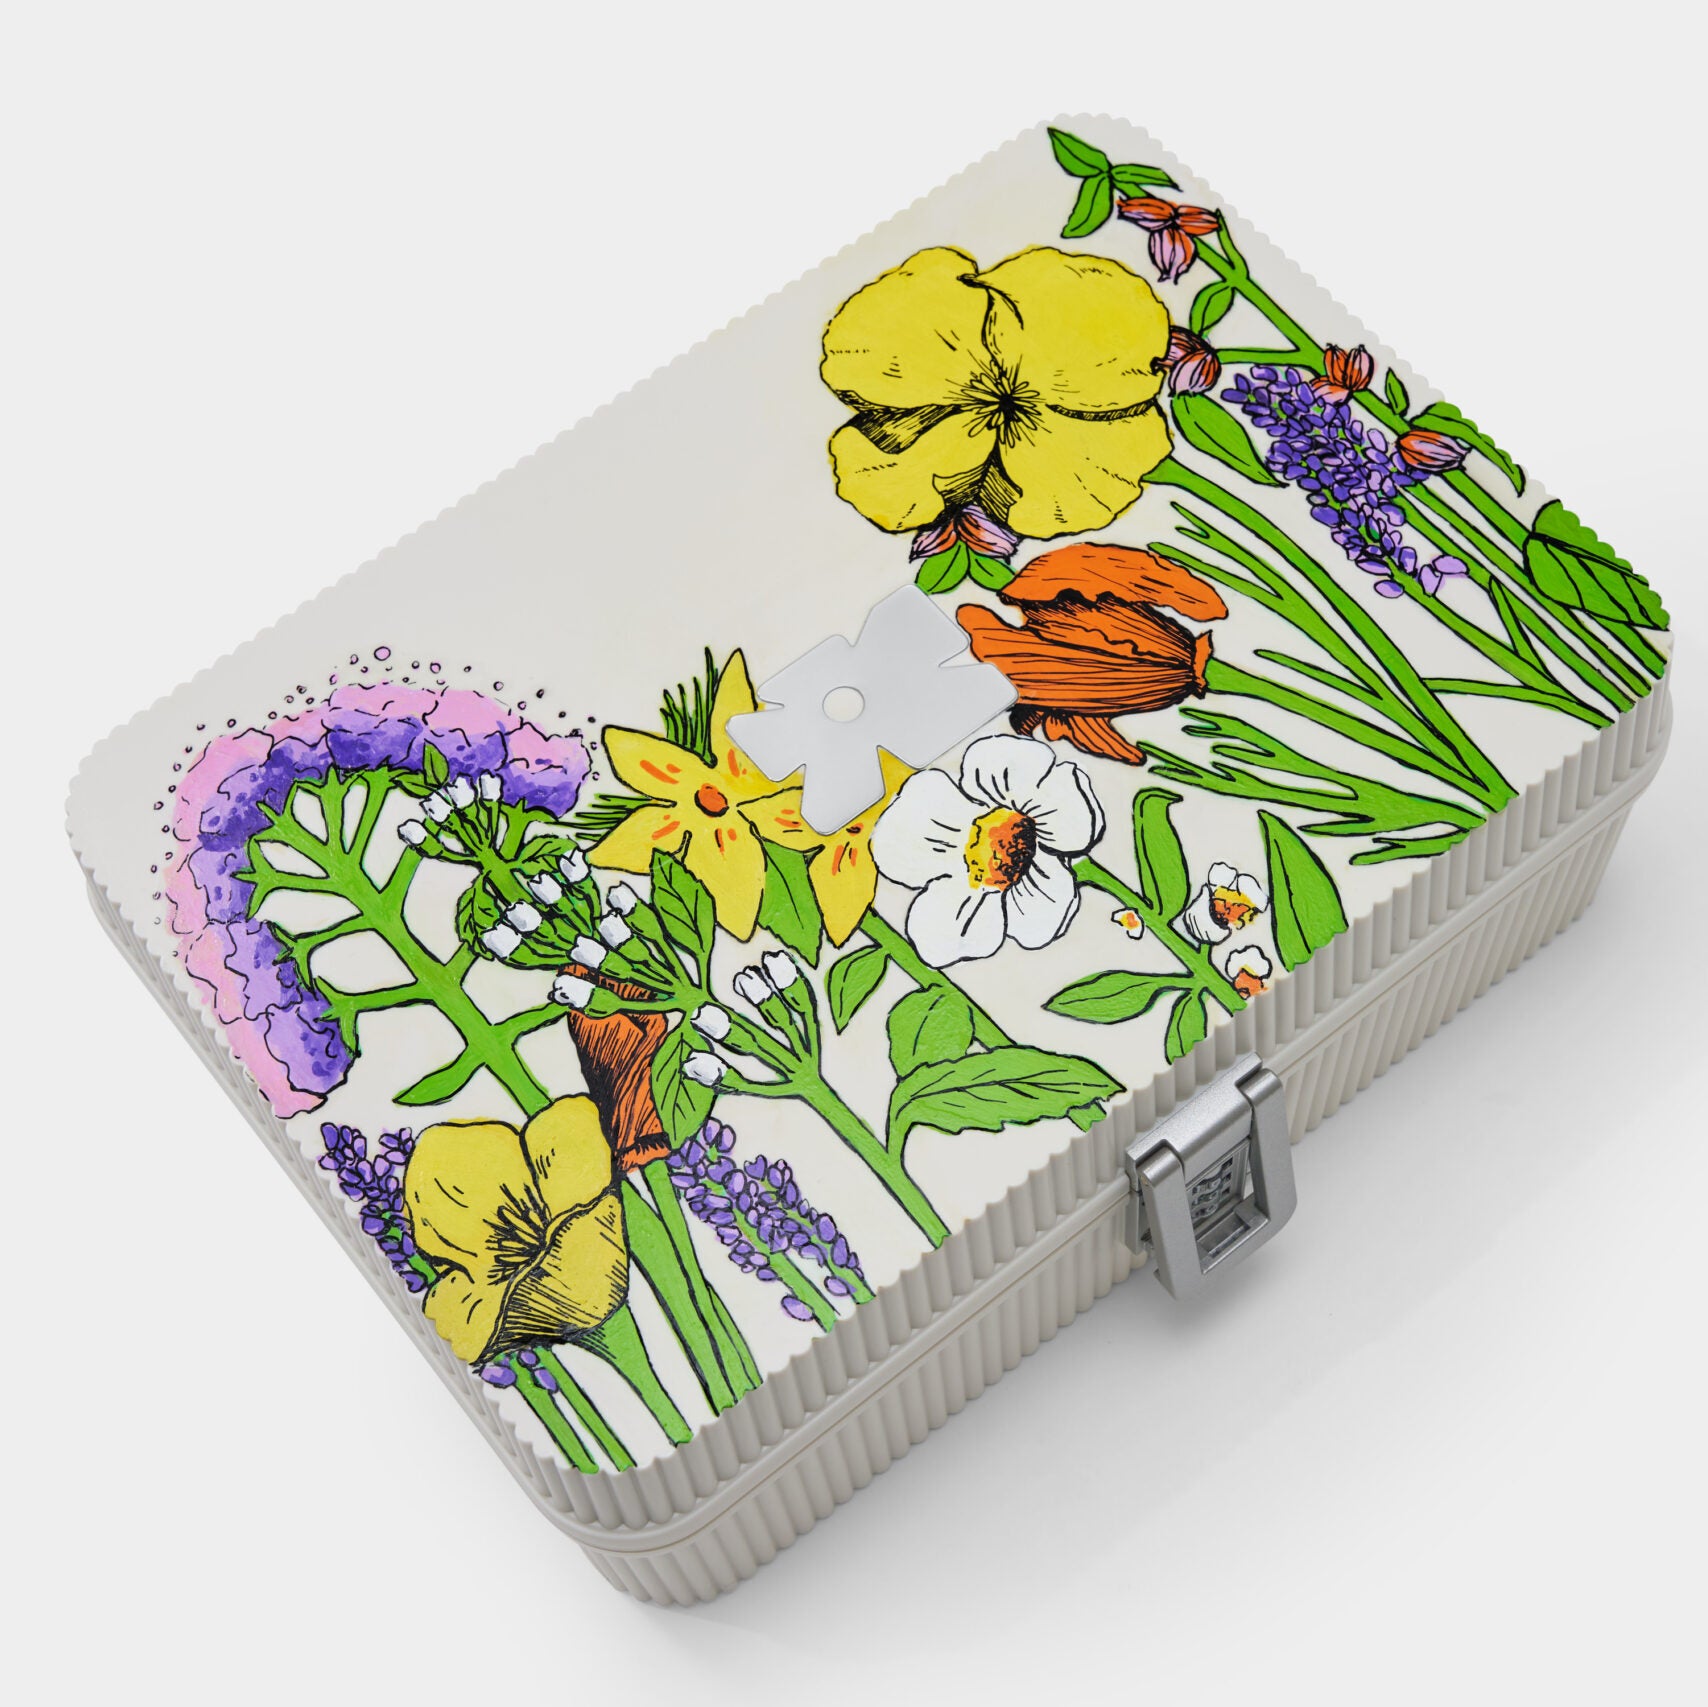 Handpainted box with flowers